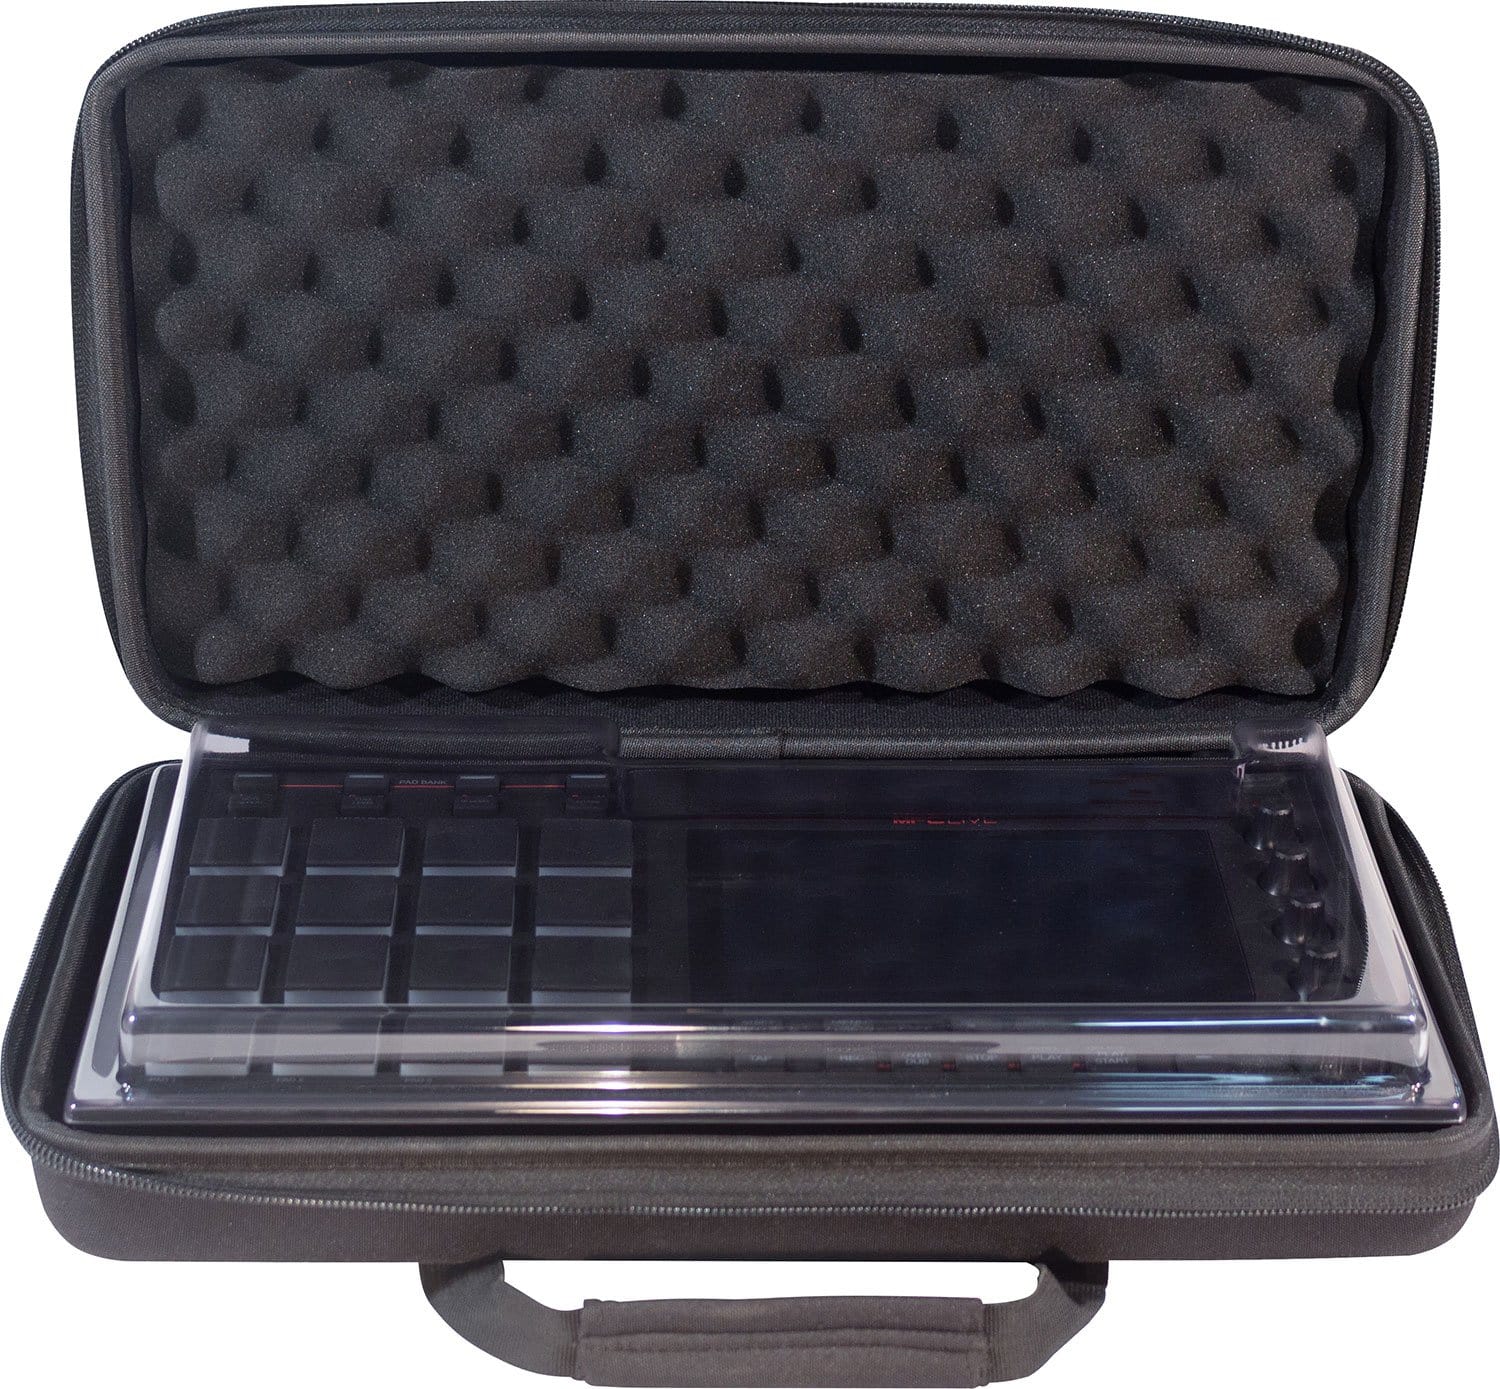 Headliner HL12001 Pro-Fit Case for Akai MPC Live - PSSL ProSound and Stage Lighting